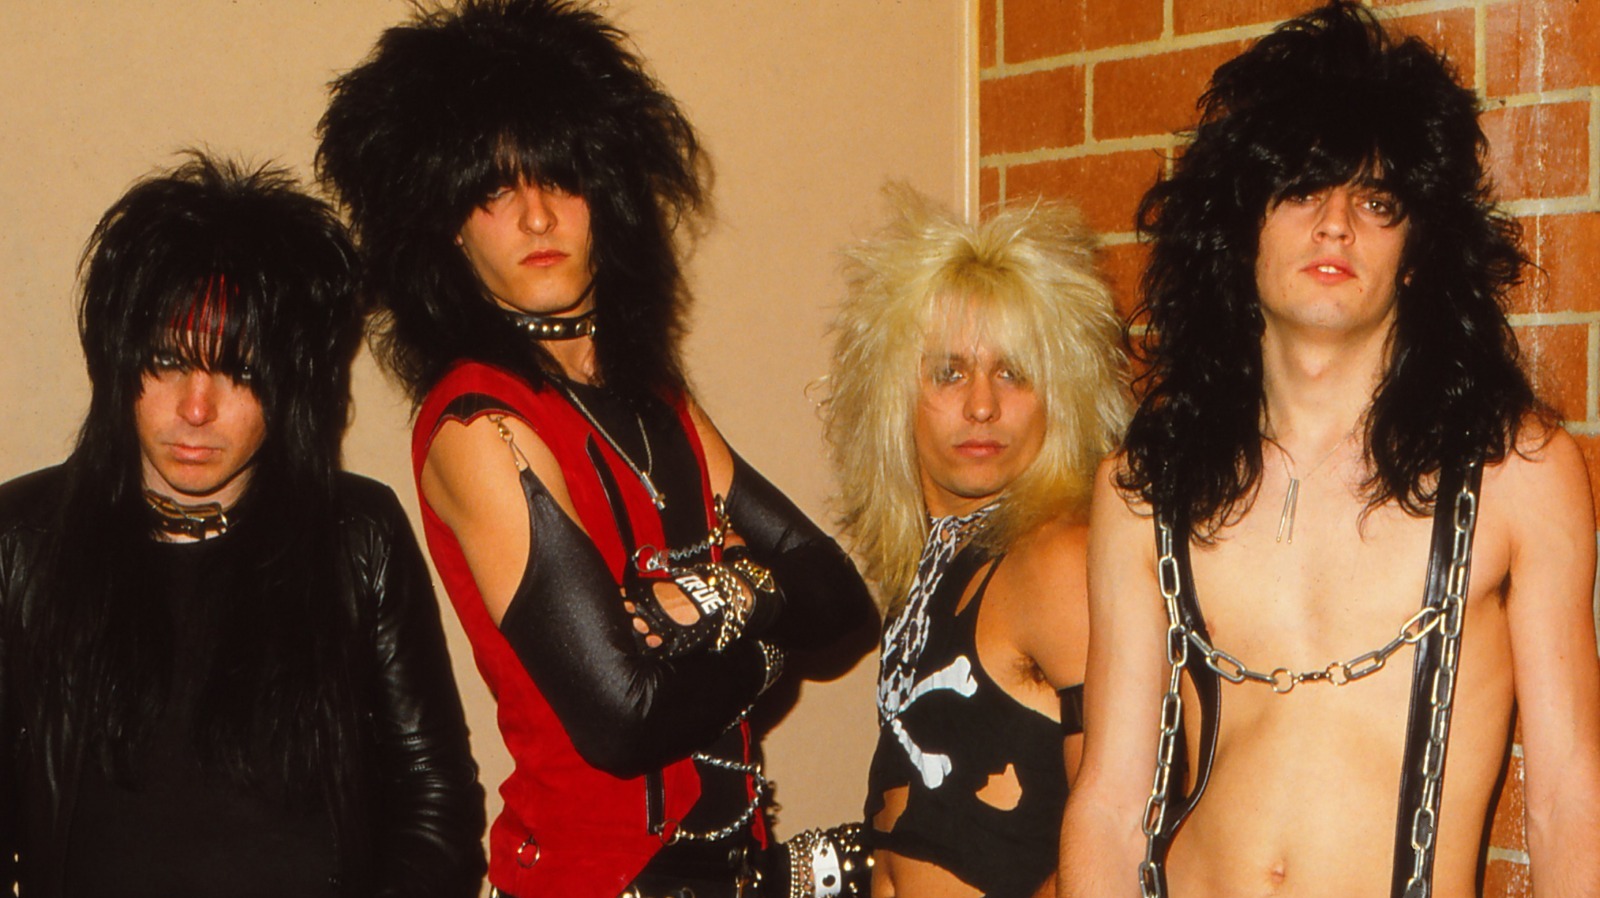 A Complete Timeline Of The Whirlwind Changes To Motley Crue’s Lineup – Grunge